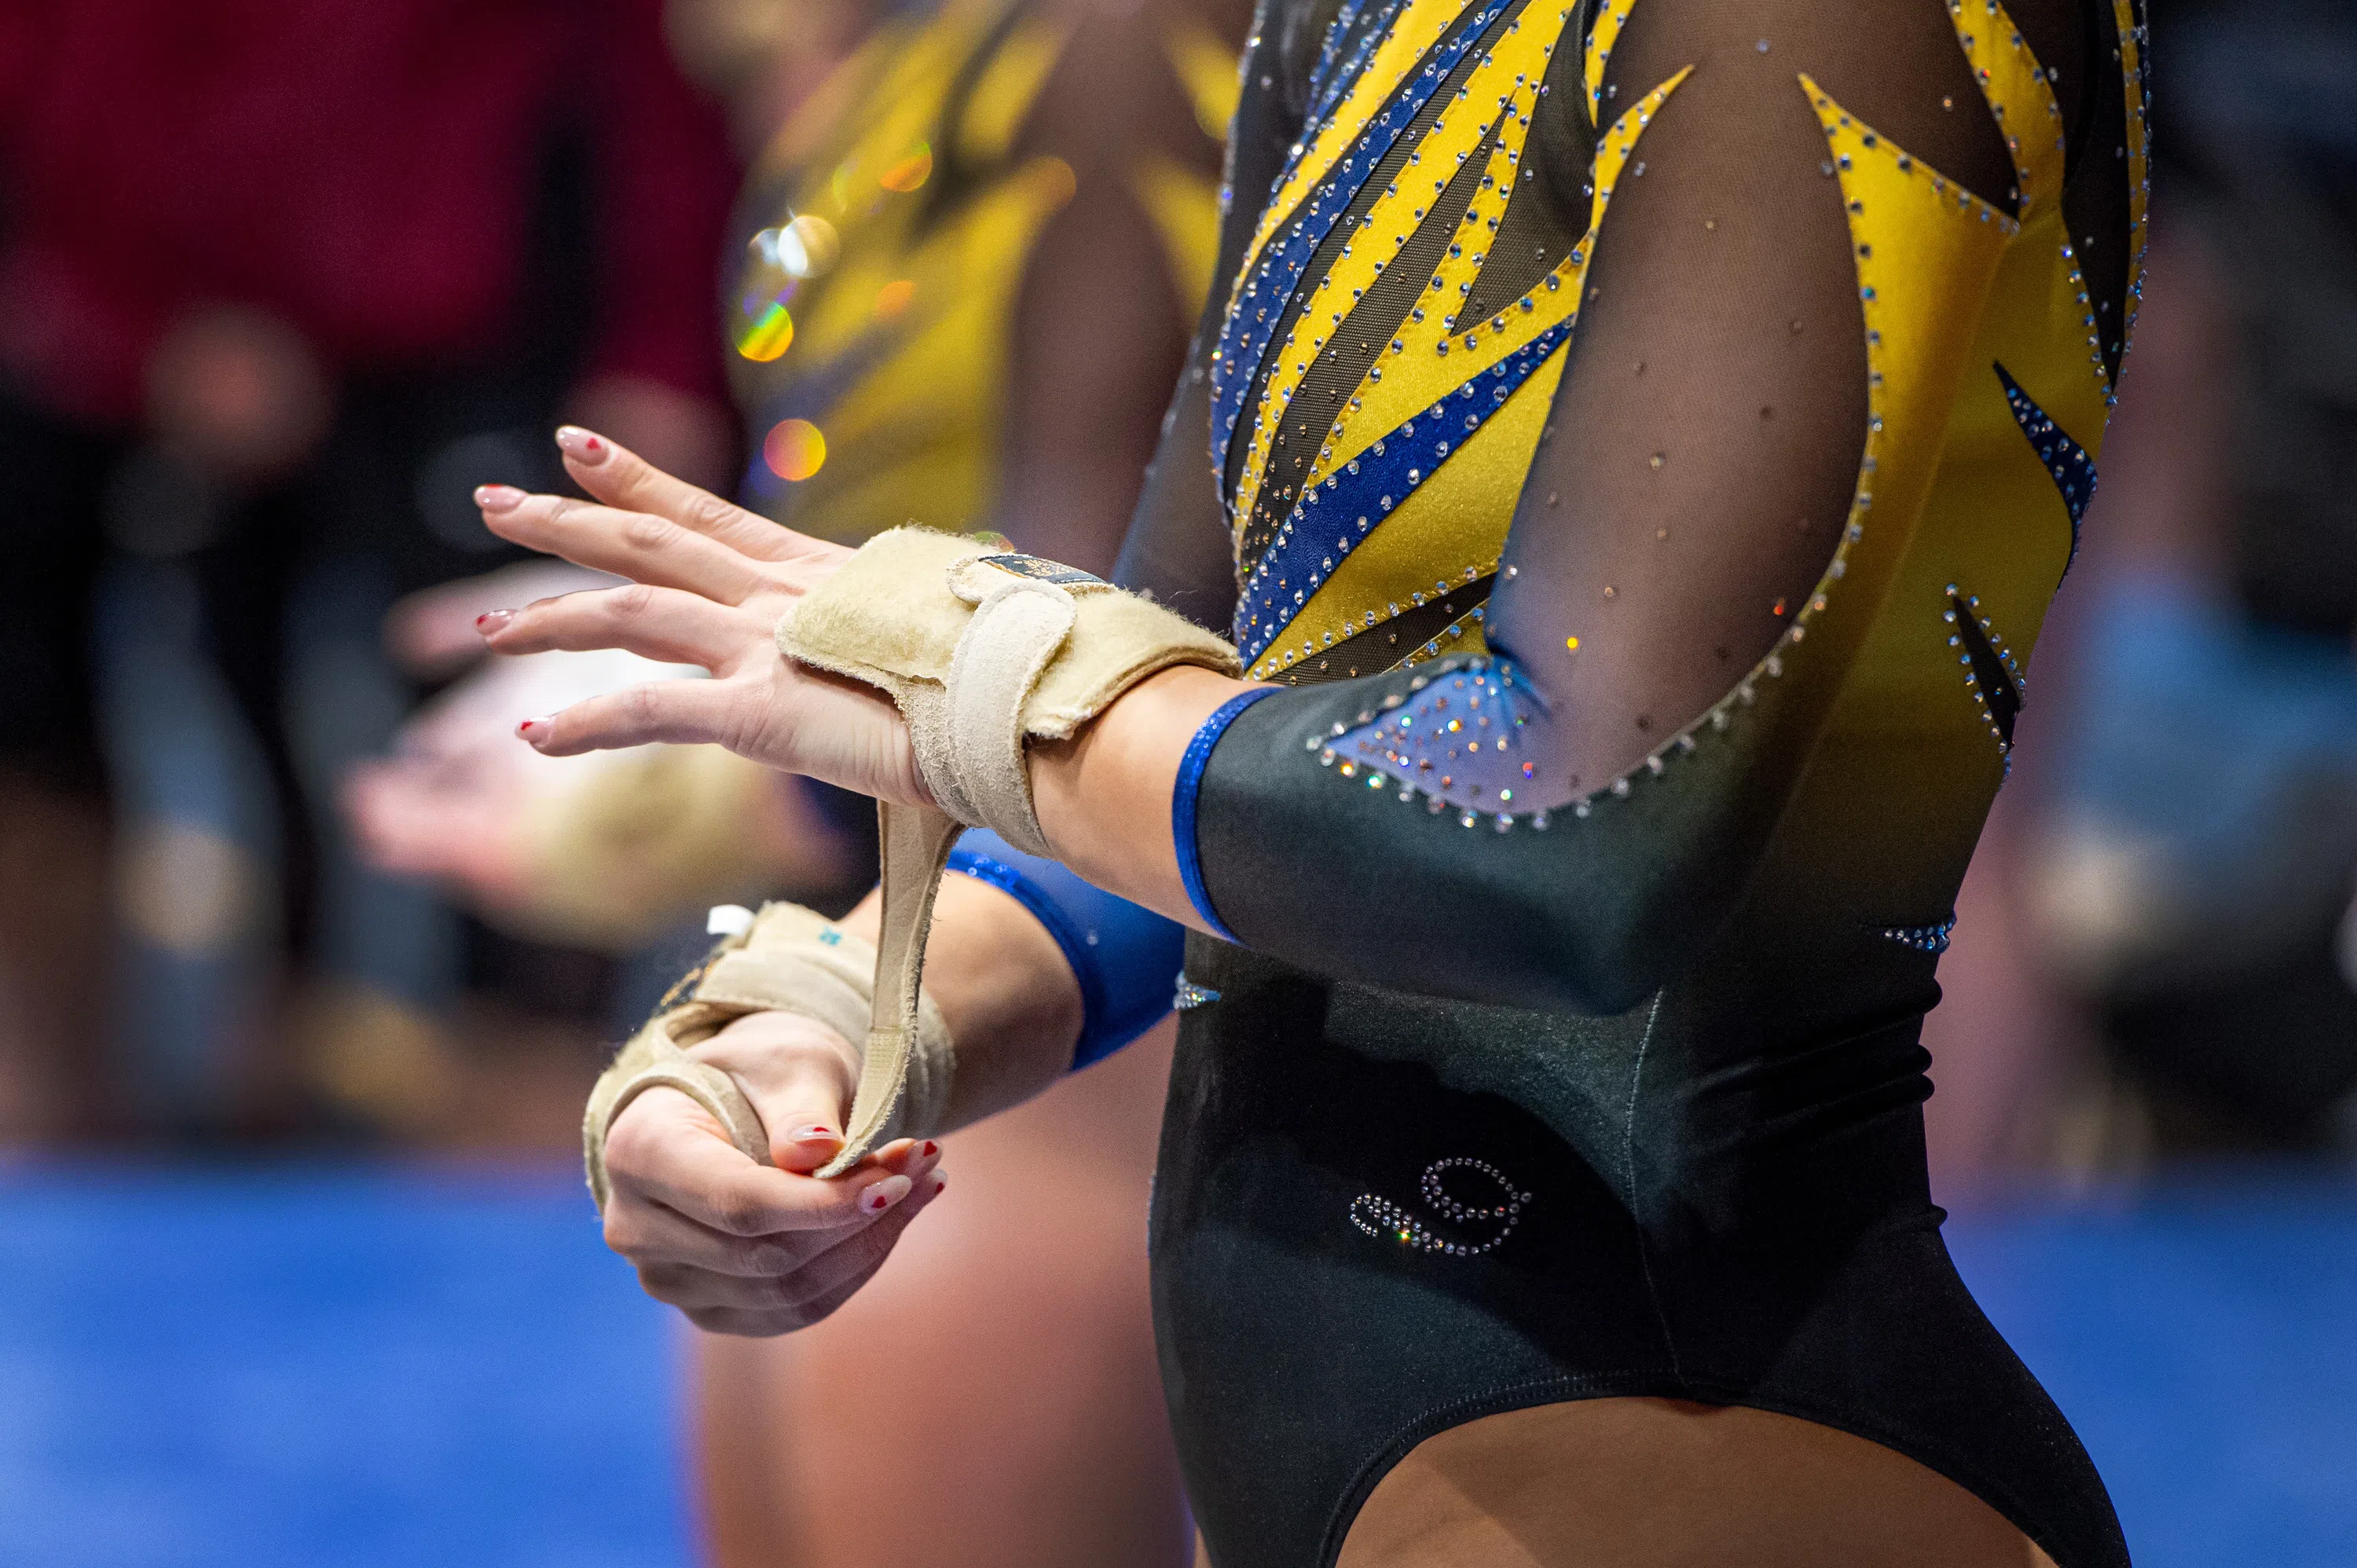 A gymnast adjusts the straps on her hand grips.